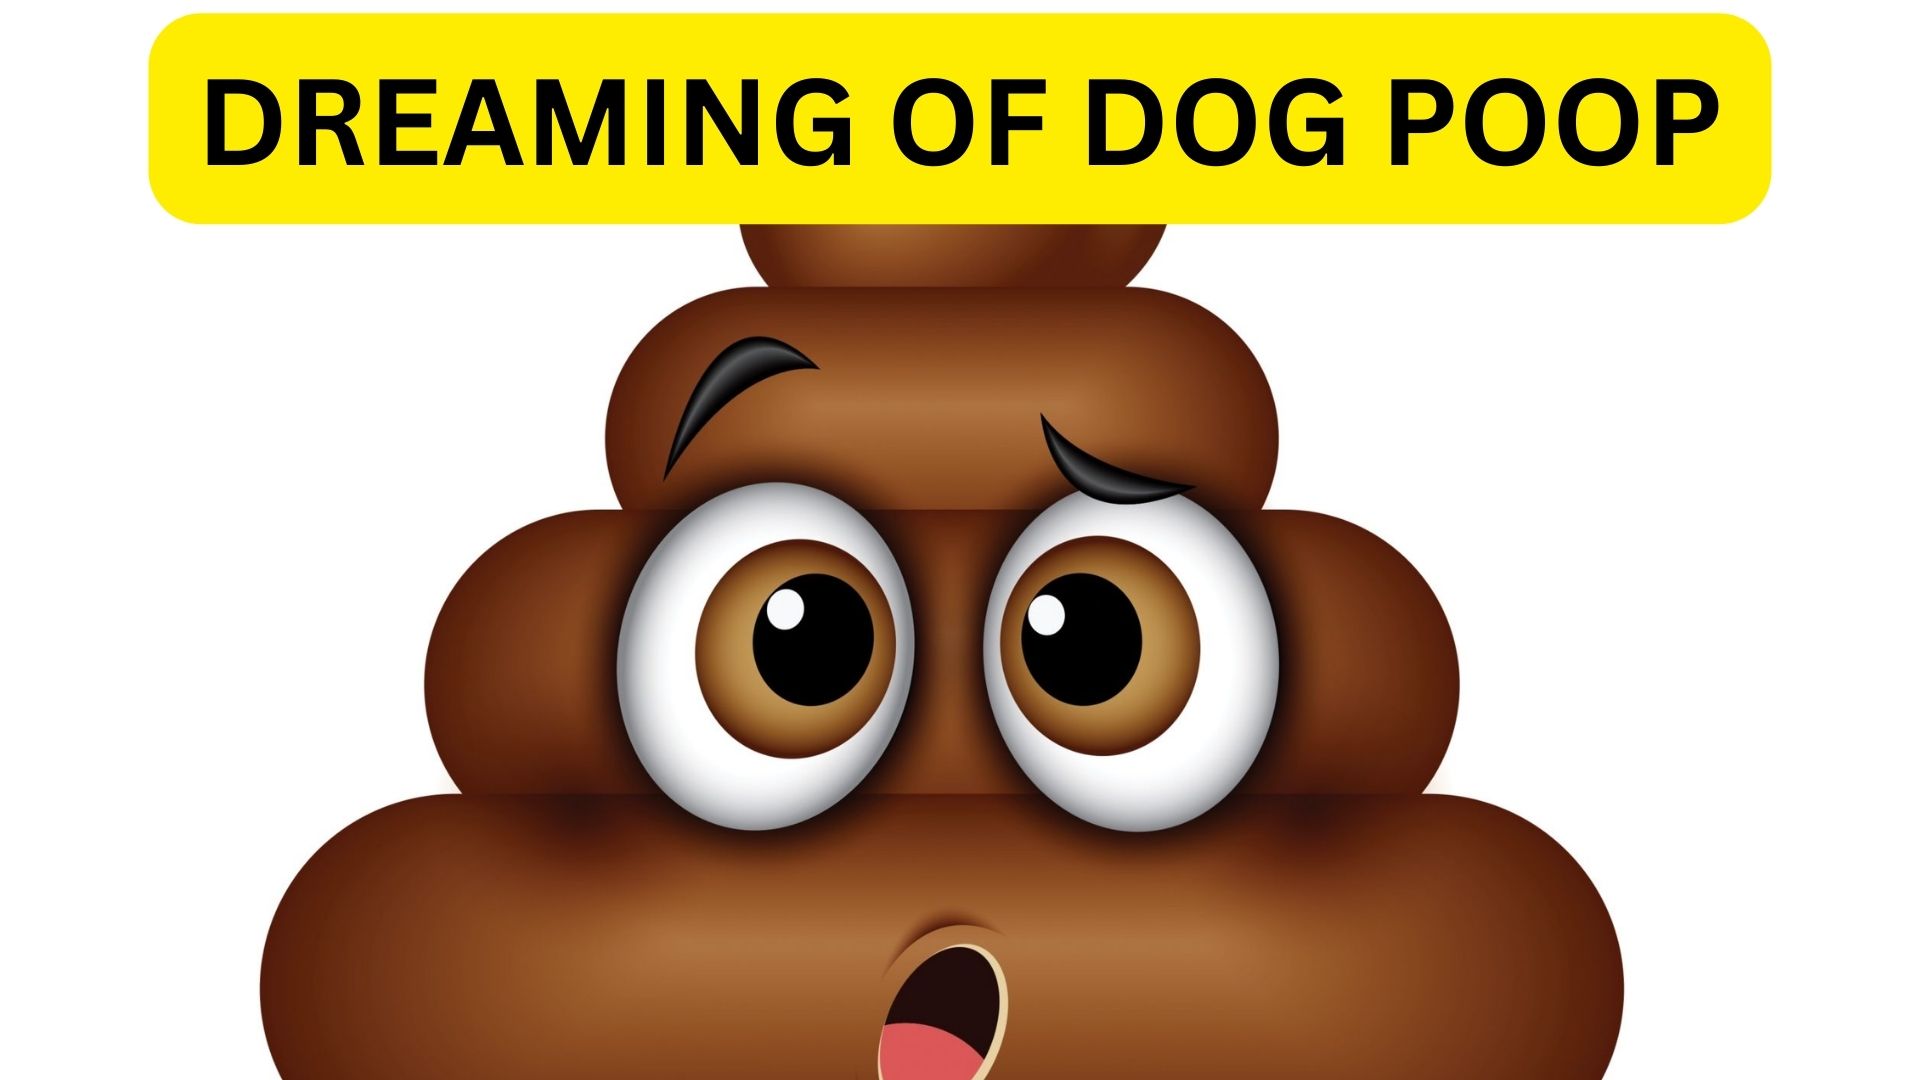 Dreaming Of Dog Poop - It Indicates An Unpleasant Experience